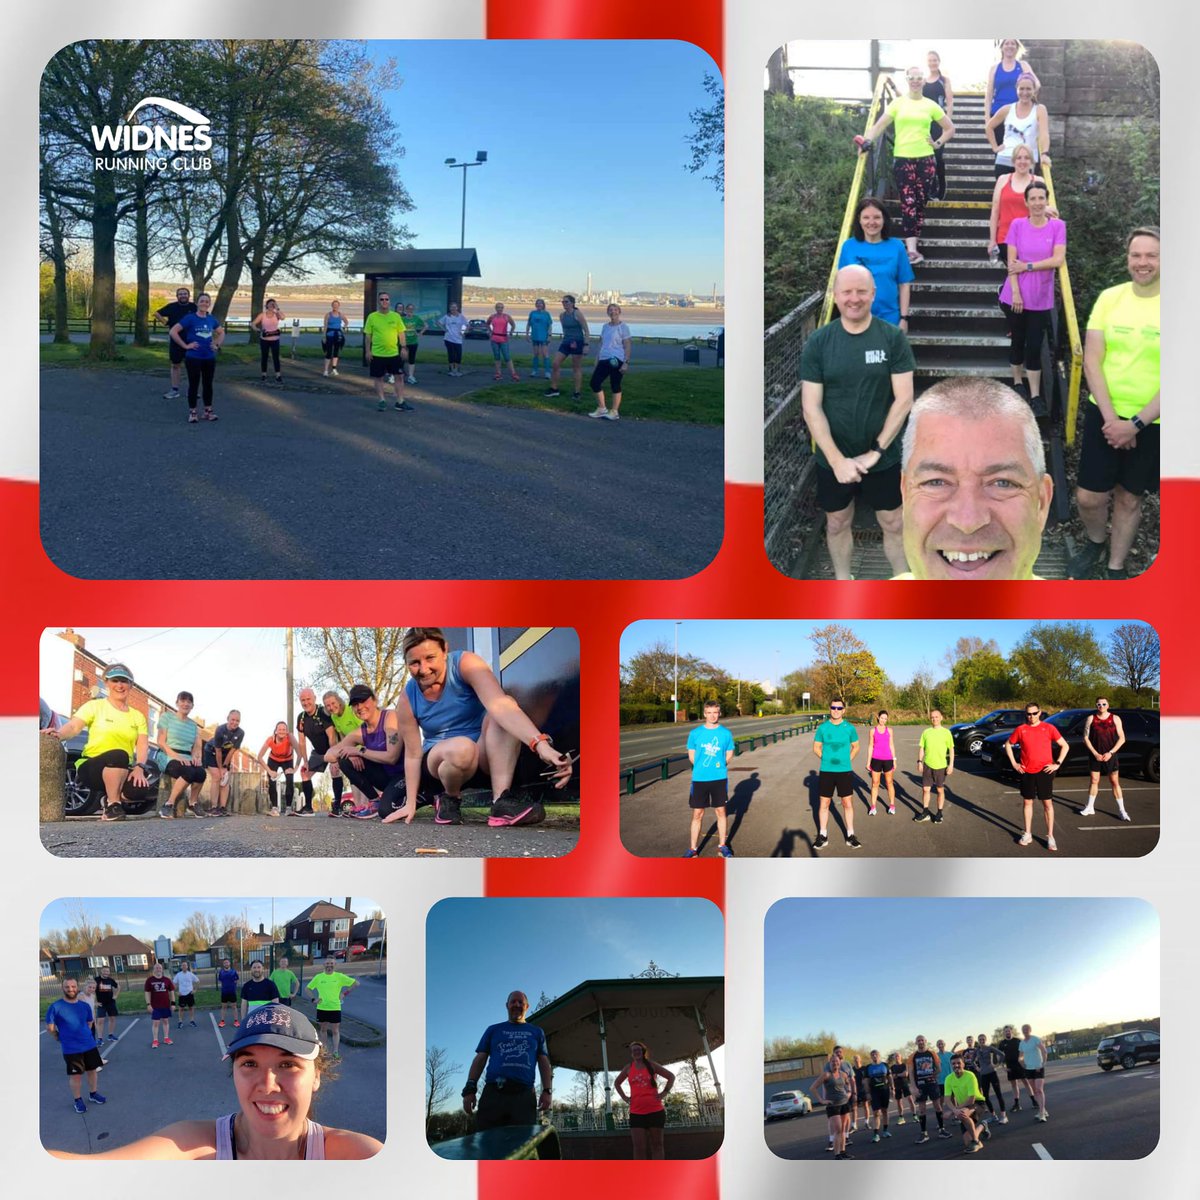 Happy St George's Day! Our Thursday social groups weren't slaying any dragons last night but they were leaving red hot trails all round the streets of Widnes! 🔥 Great running & great company, that's what we like to celebrate 👍 #widnesrunningclub #widnes #Halton #socialrun